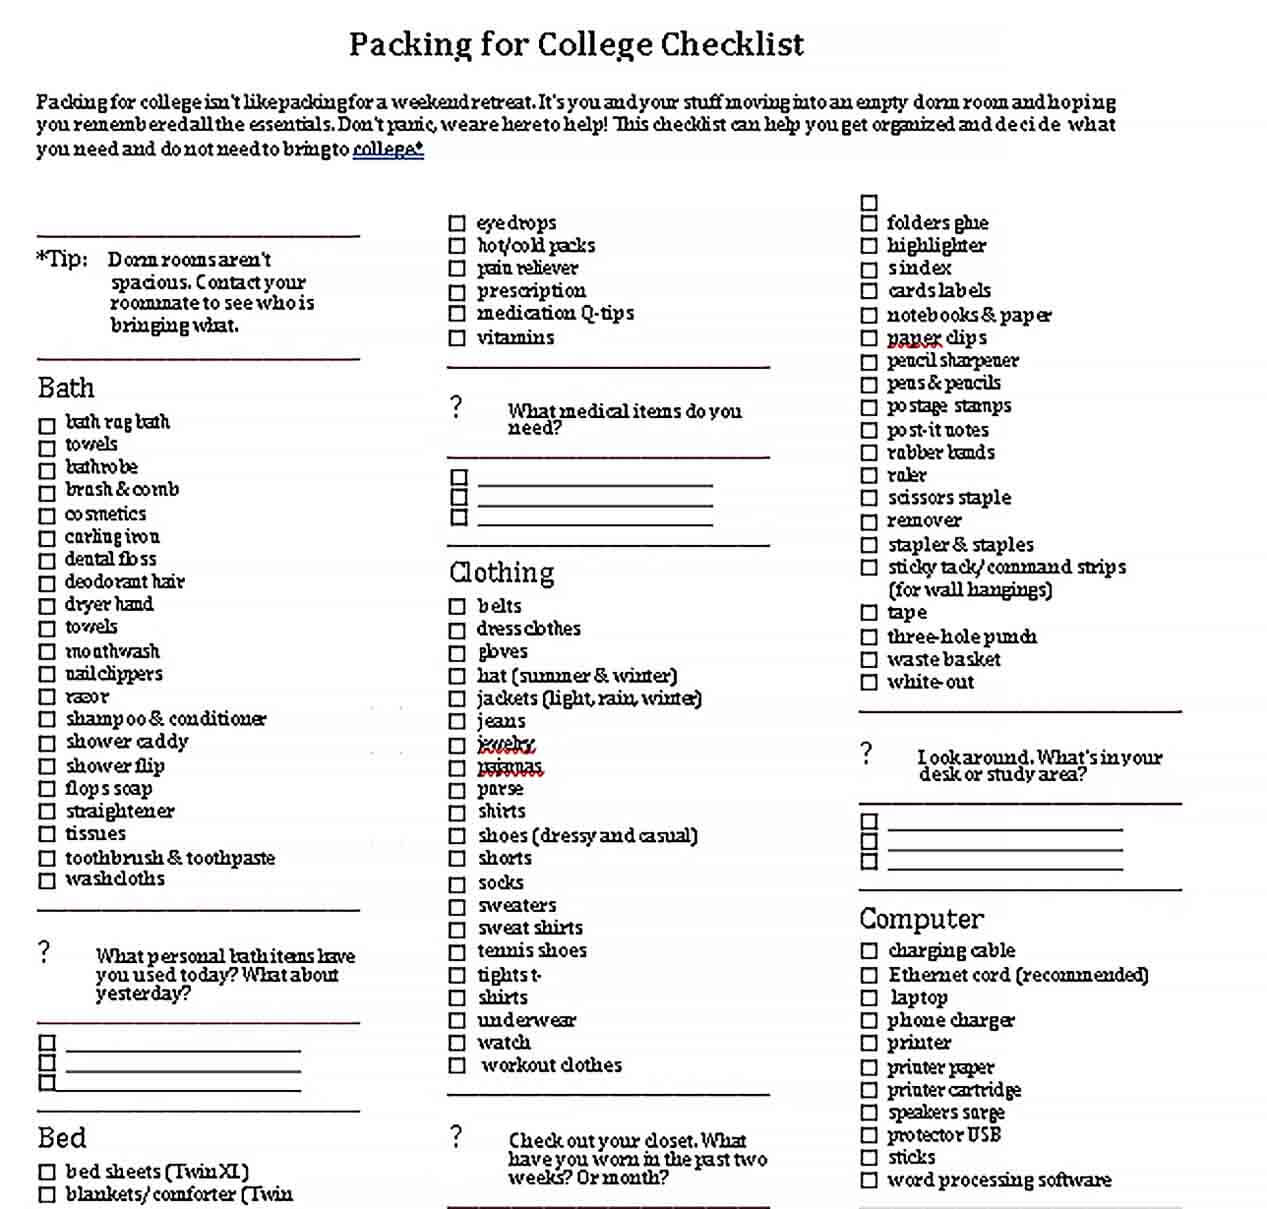 Sample Packing For College Checklist 1